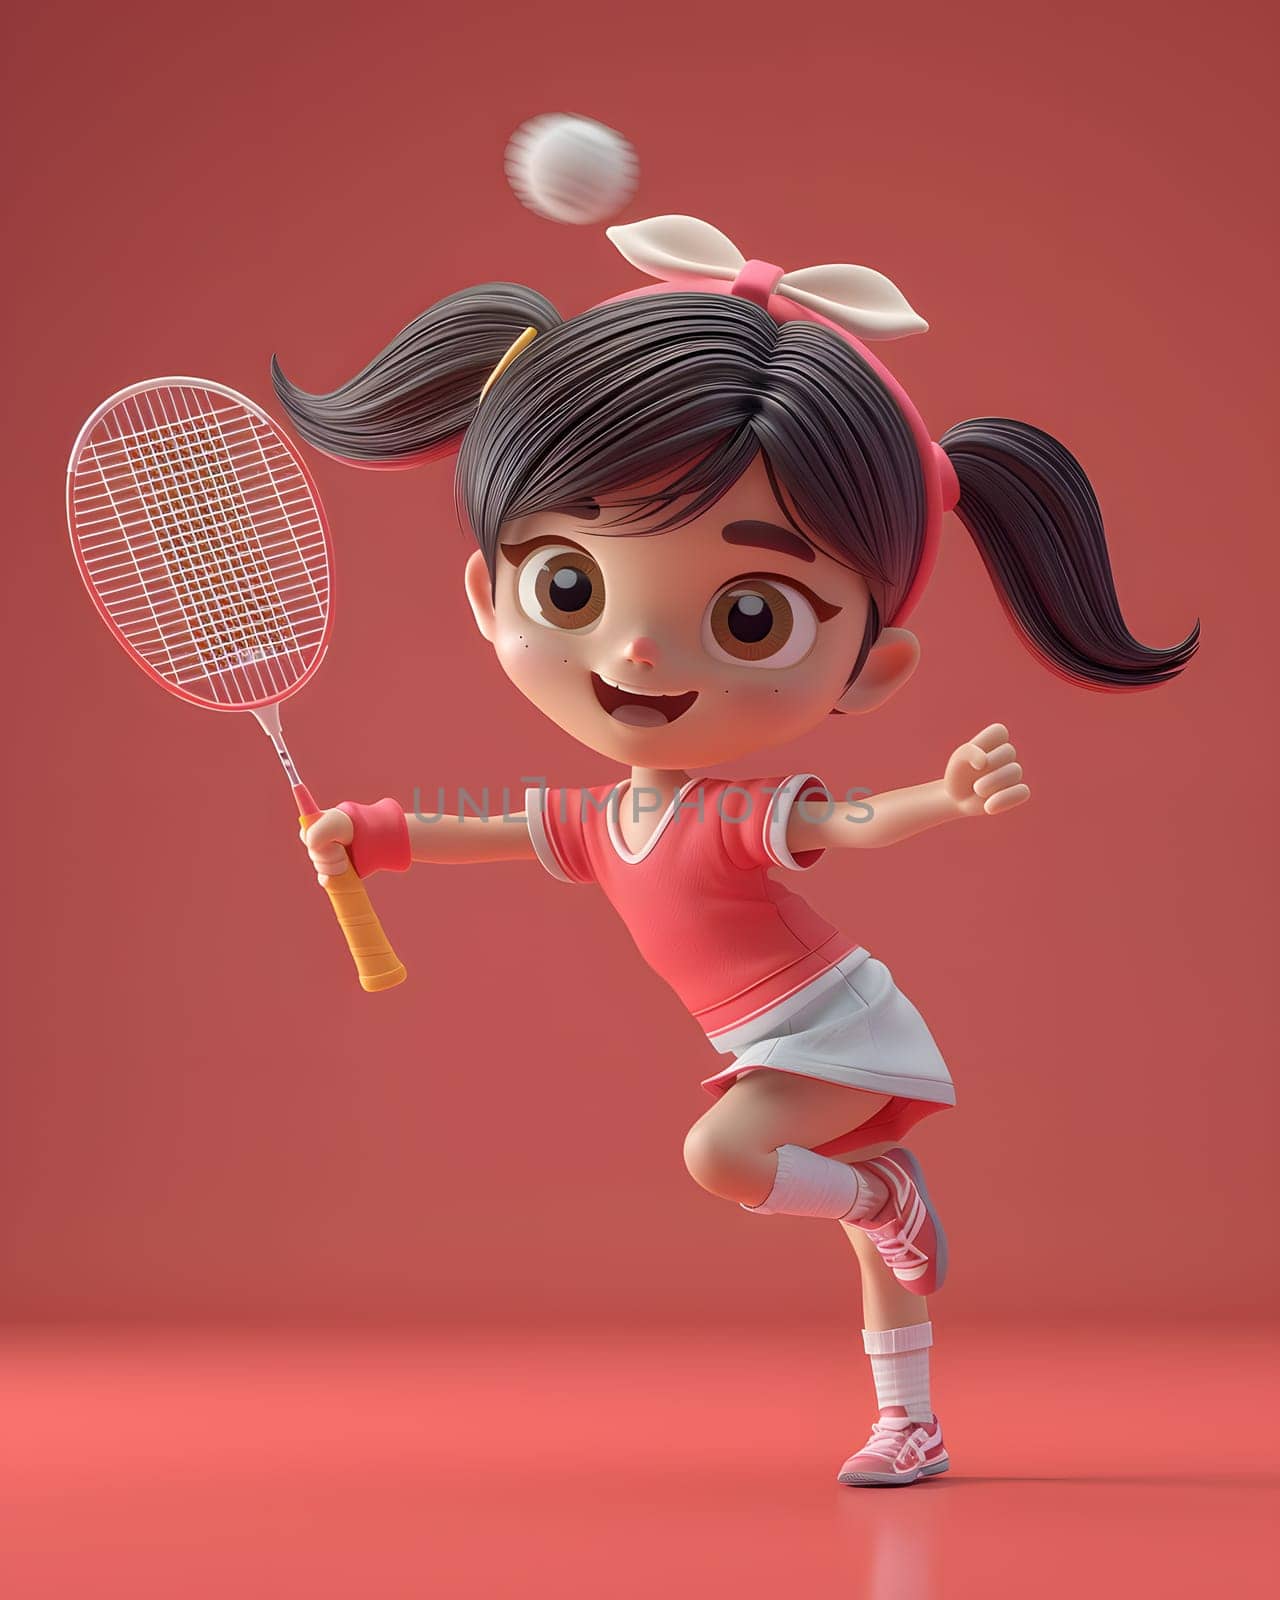 Animated cartoon girl with a smile hitting a ball with a badminton racket by Nadtochiy